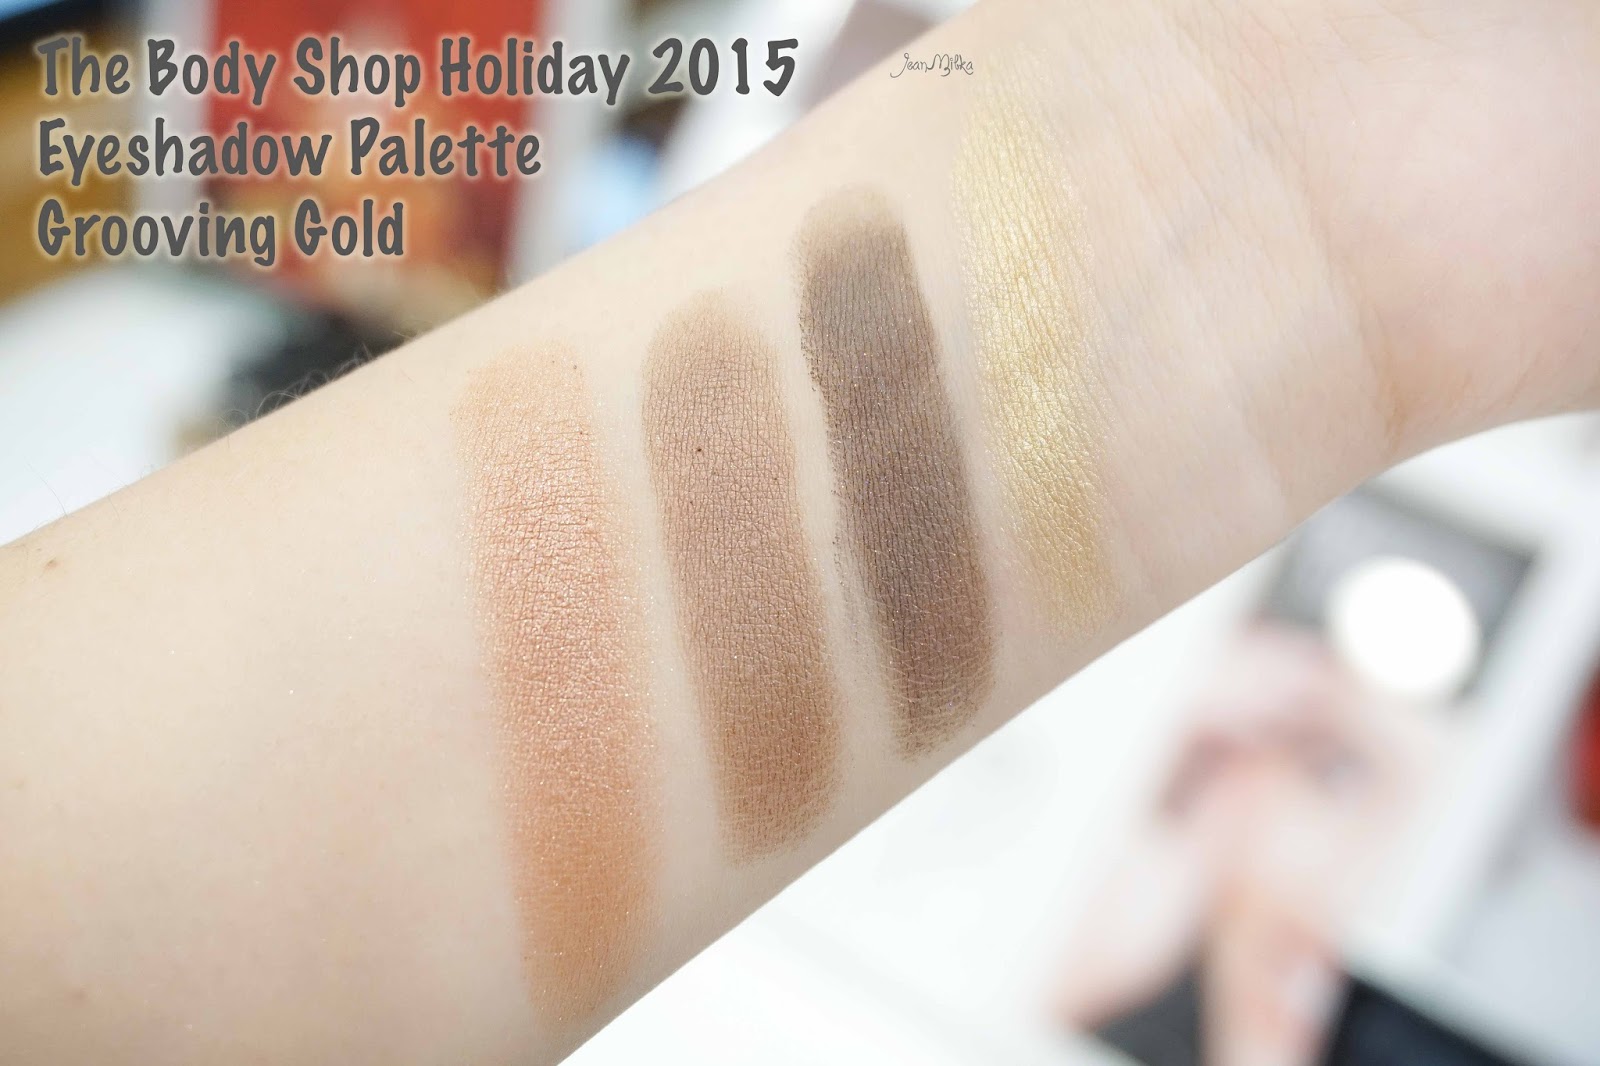 the body shop, body shop, christmas, christmas gift, gift, holiday, gifts. exclusive preview, swatch, eyeshadow, eyeshadow palette, grooving gold, 